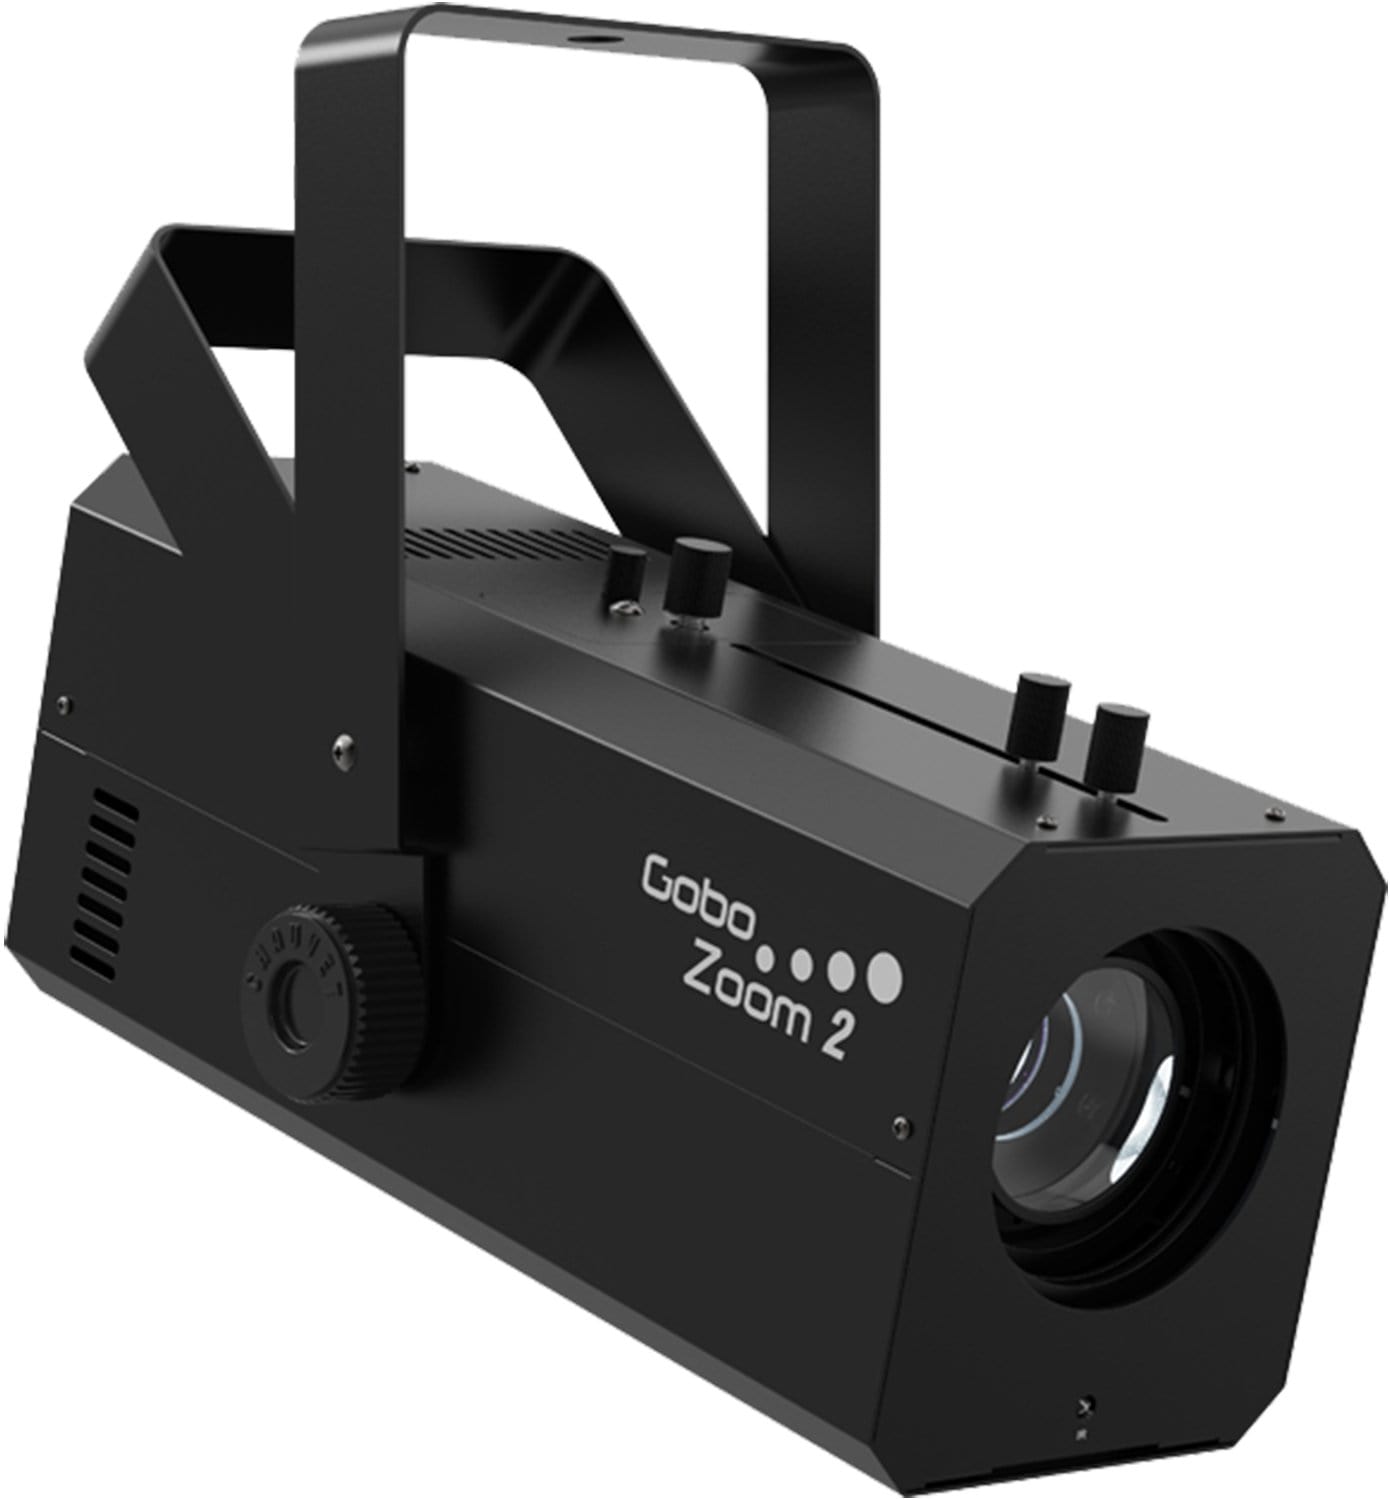 Chuavet Gobo Zoom 2 High Powered Gobo Projector - PSSL ProSound and Stage Lighting